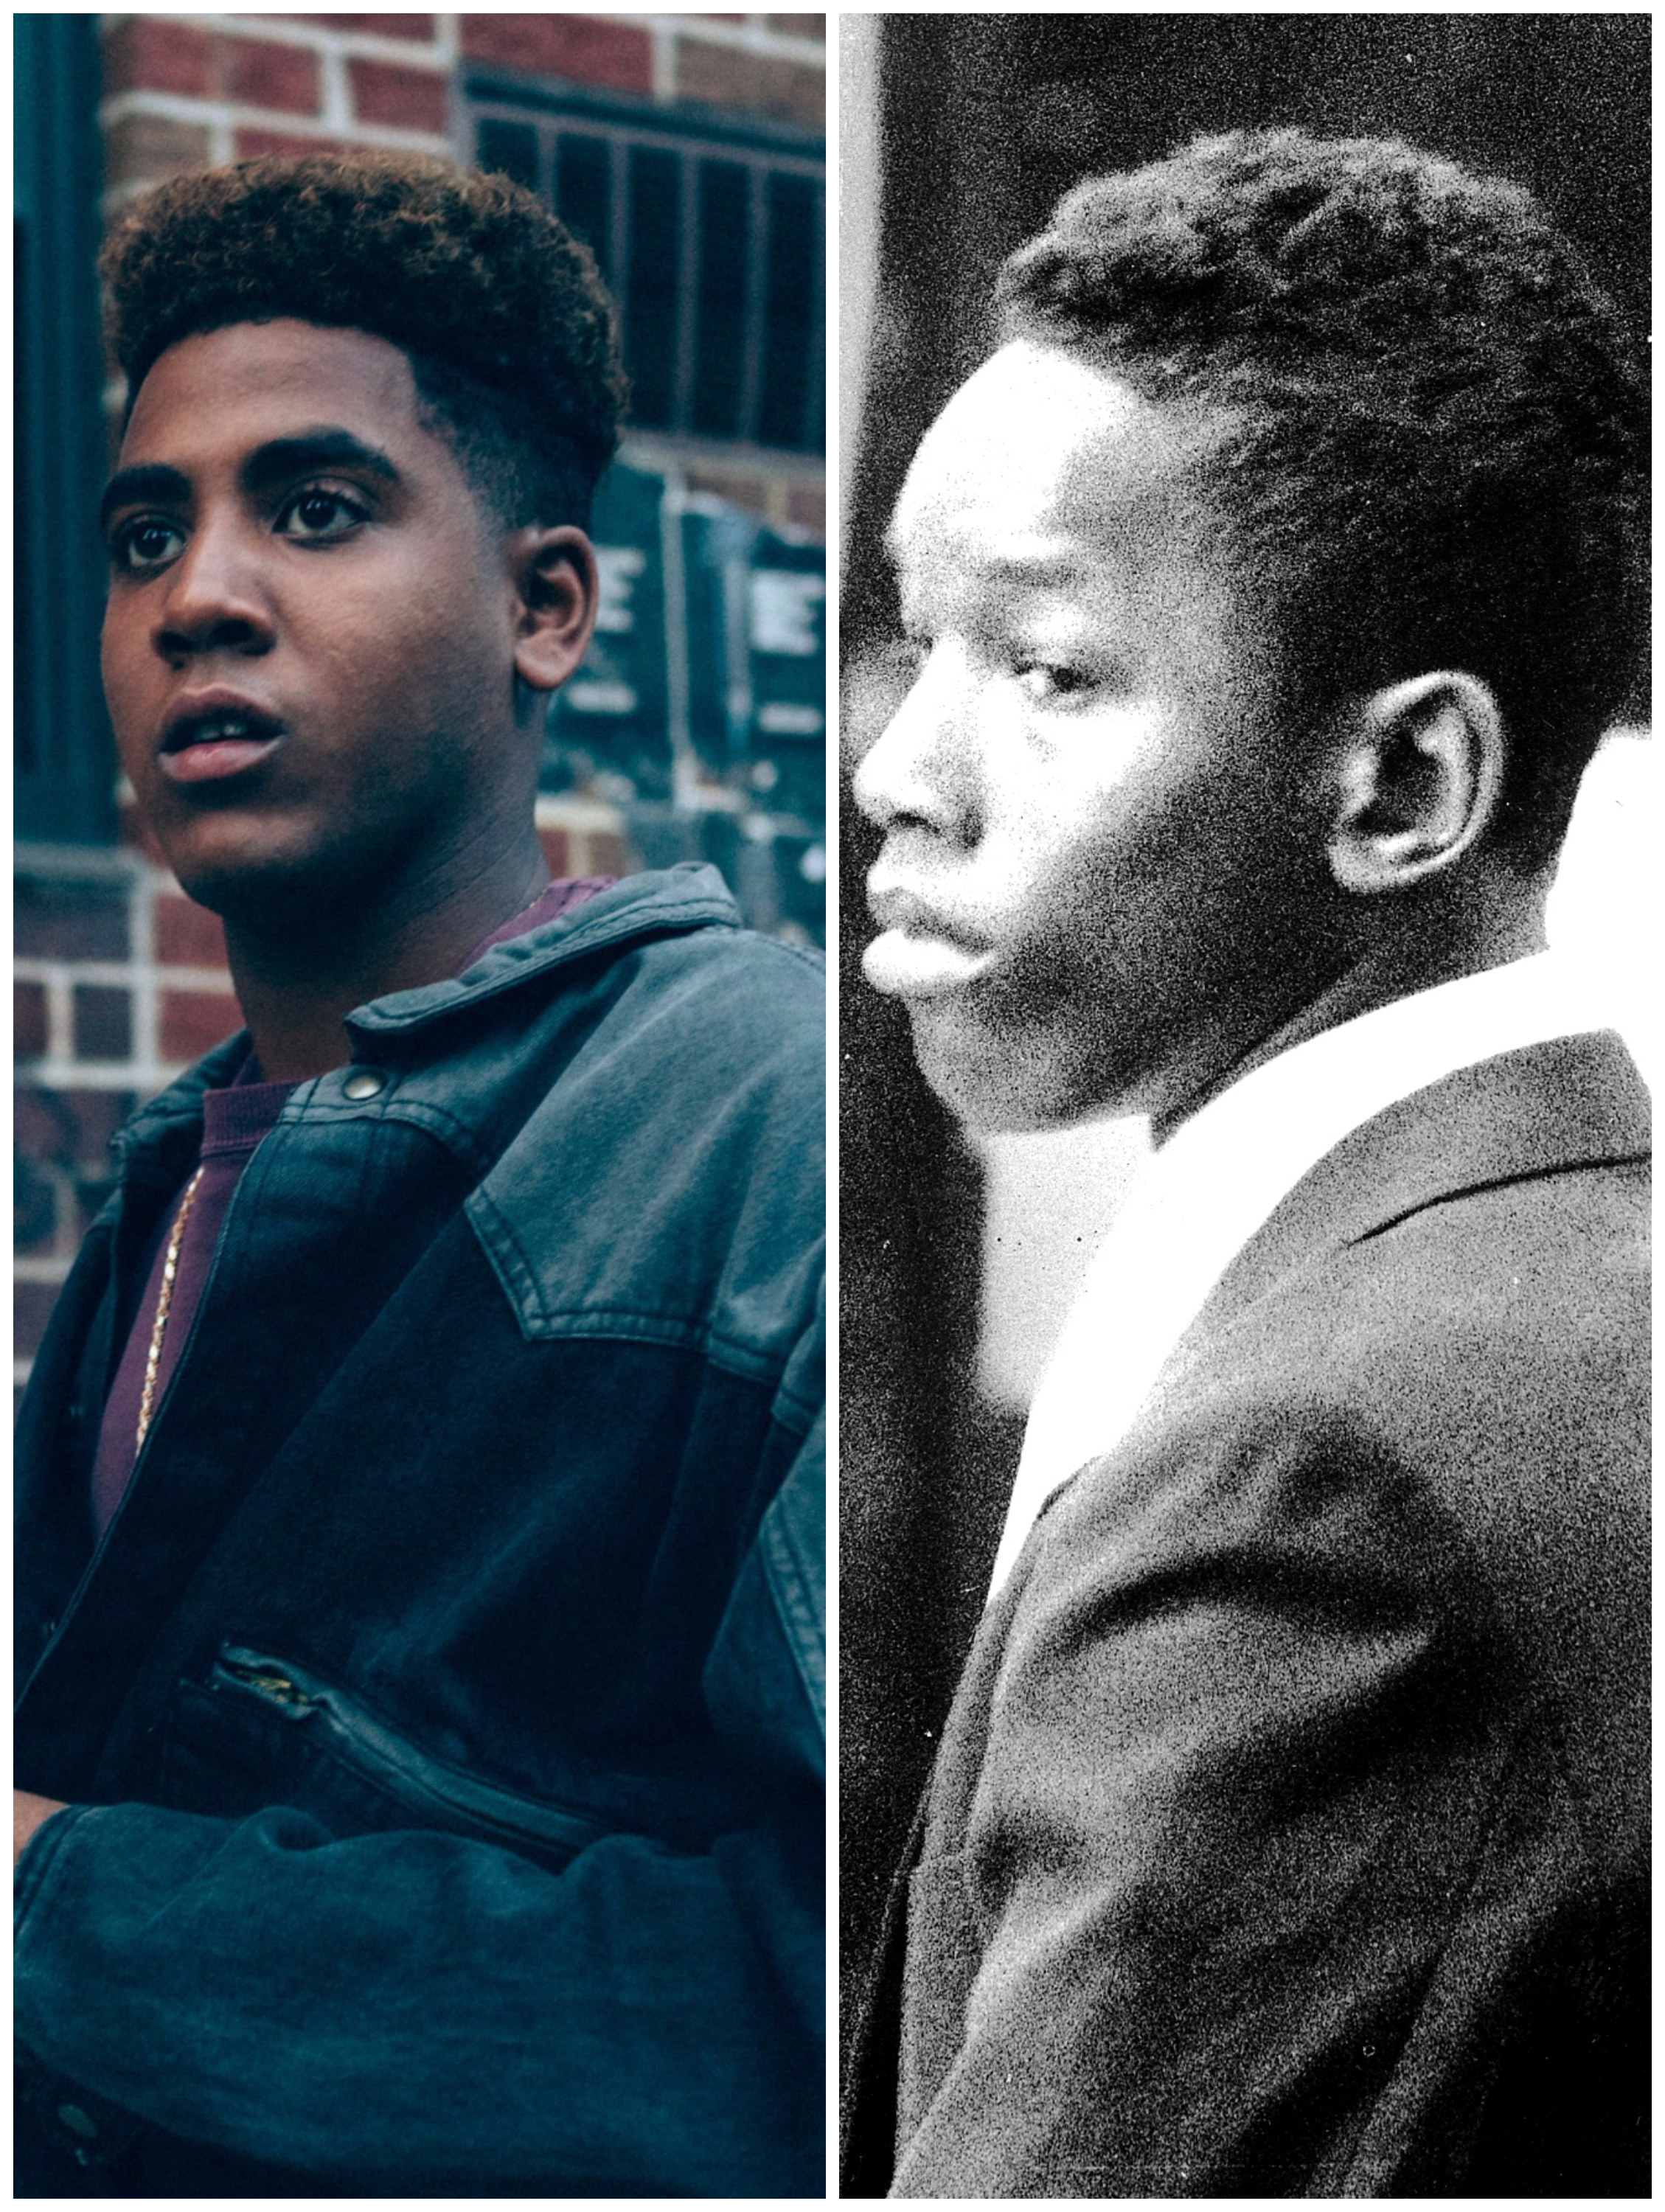 Jharrel Jerome in &quot;When They See Us&quot; vs. the real Korey Wise